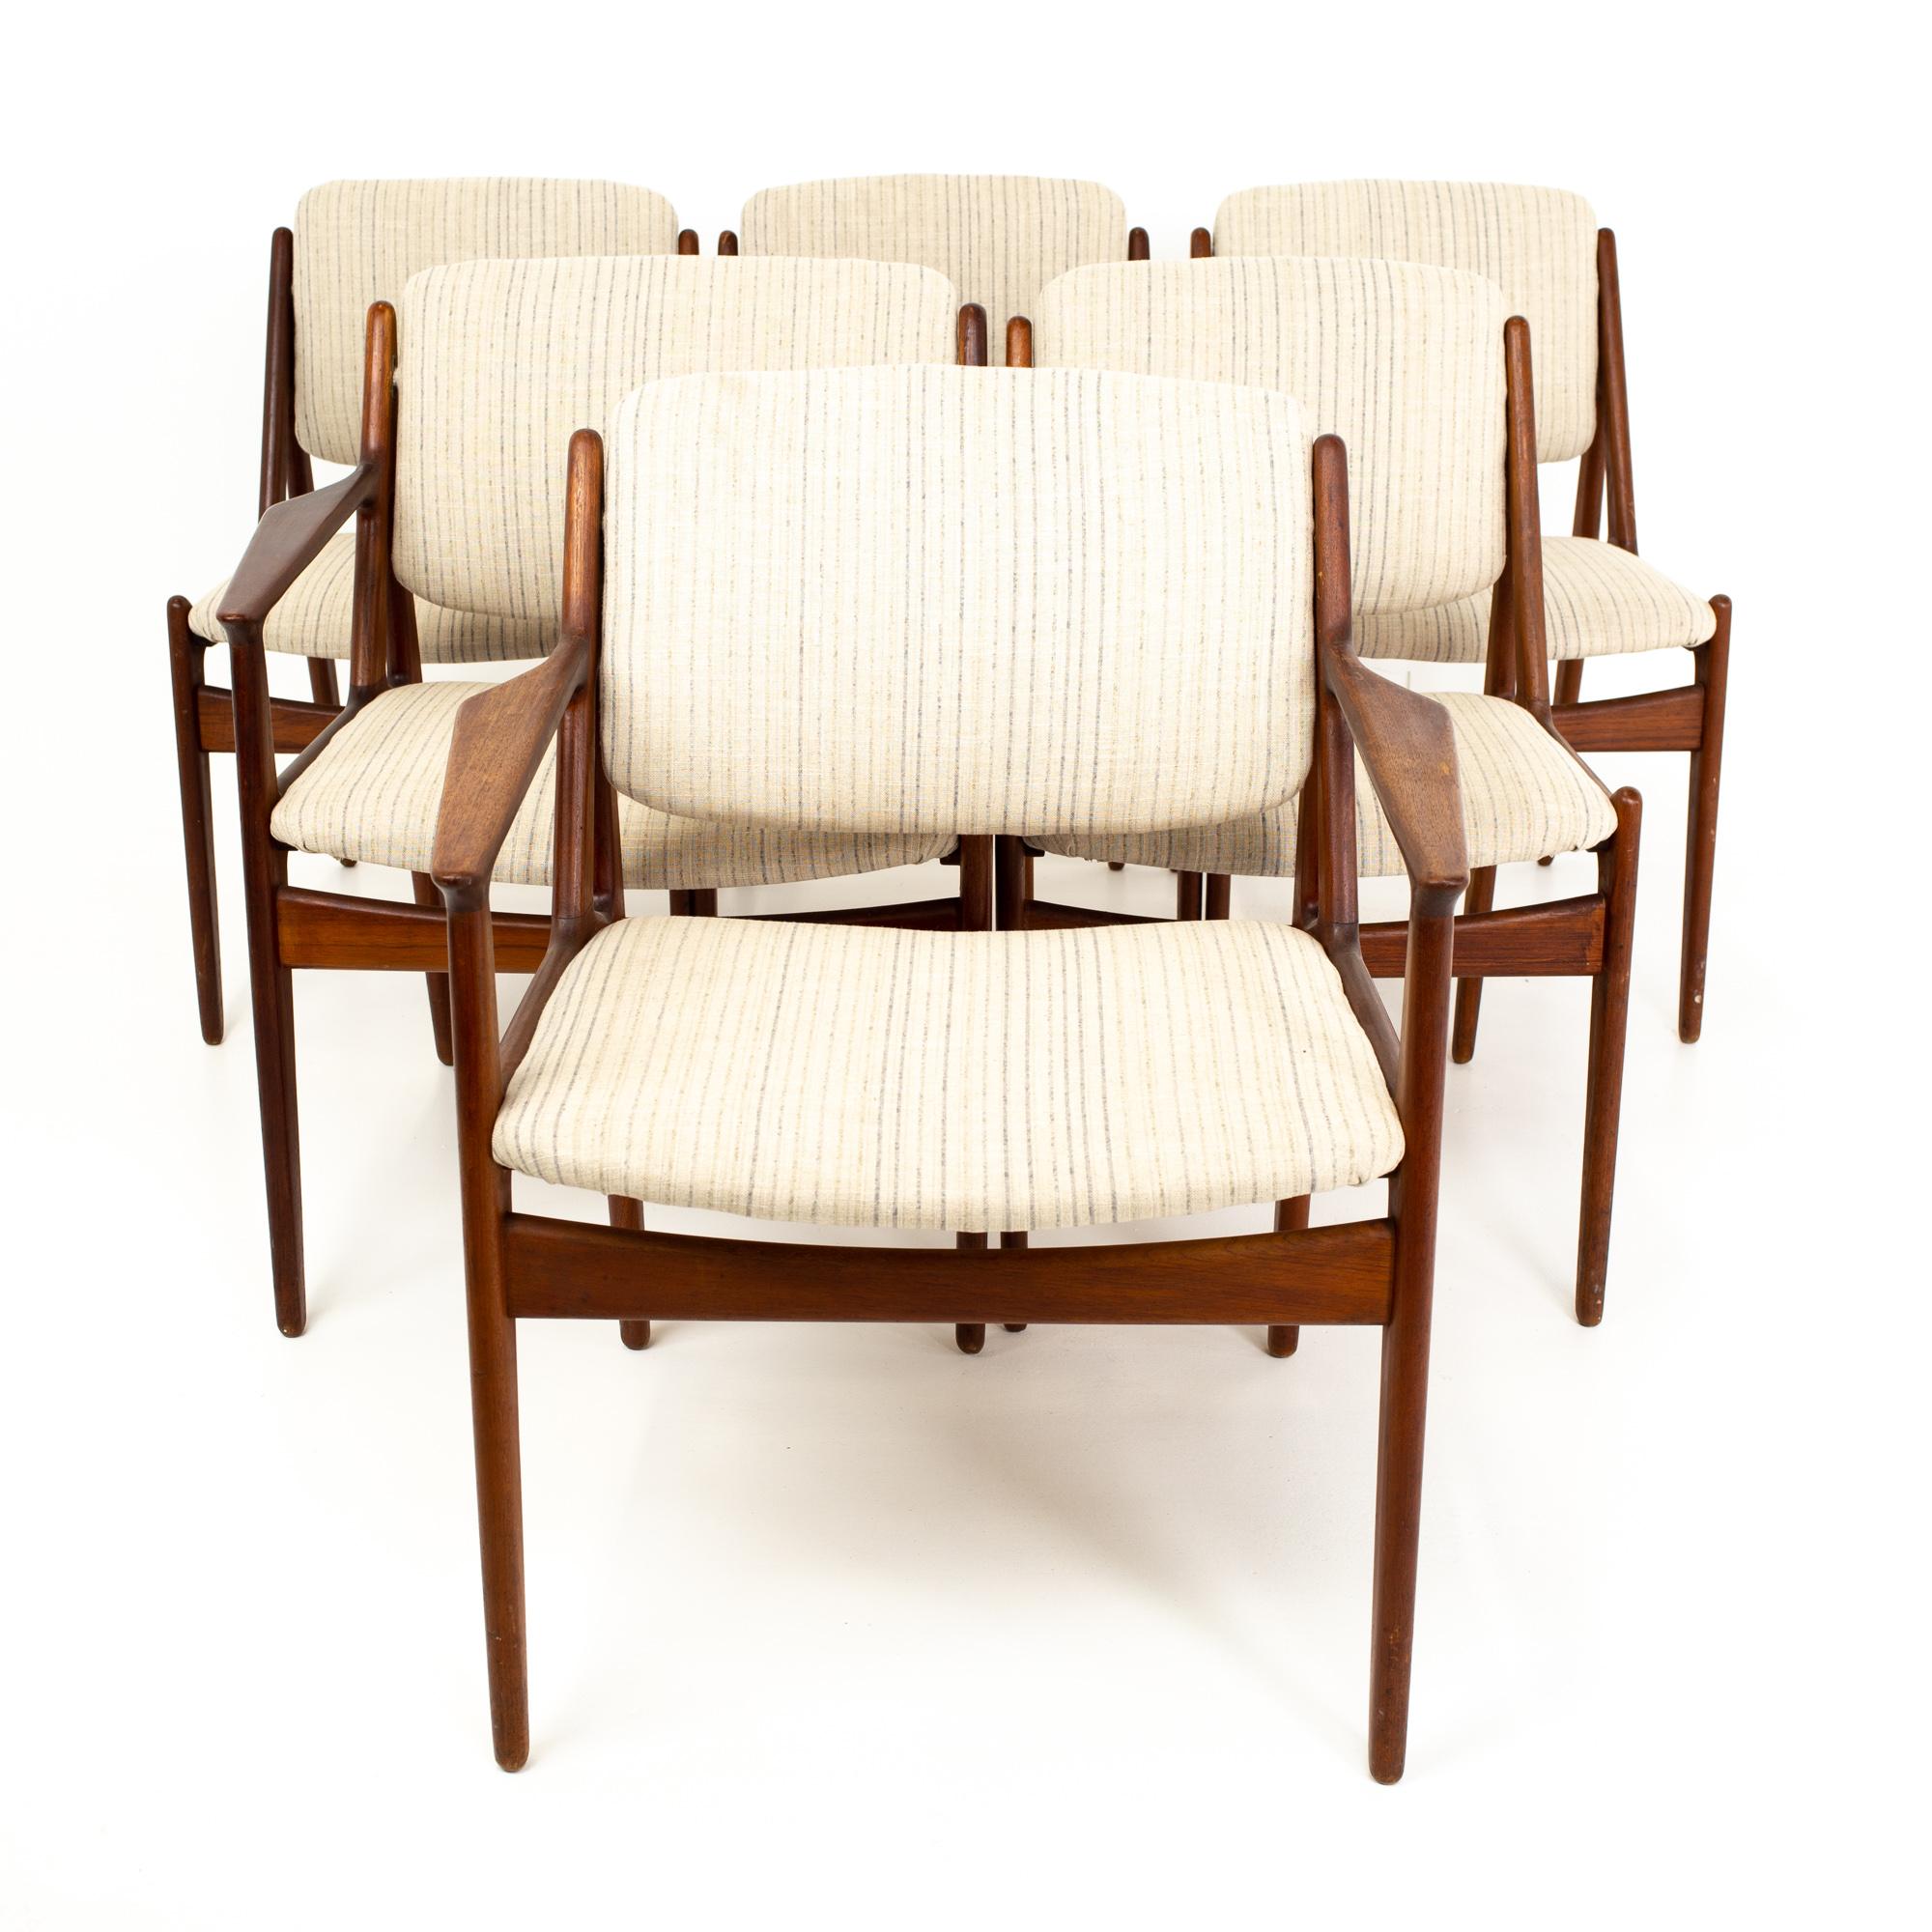 Arne Vodder Elle and Ella Mid Century teak dining chairs - Set of 6
Each chair is 25 wide x 20 deep x 31.5 high with a seat height of 17.5 inches

All pieces of furniture can be had in what we call restored vintage condition. This means the piece is